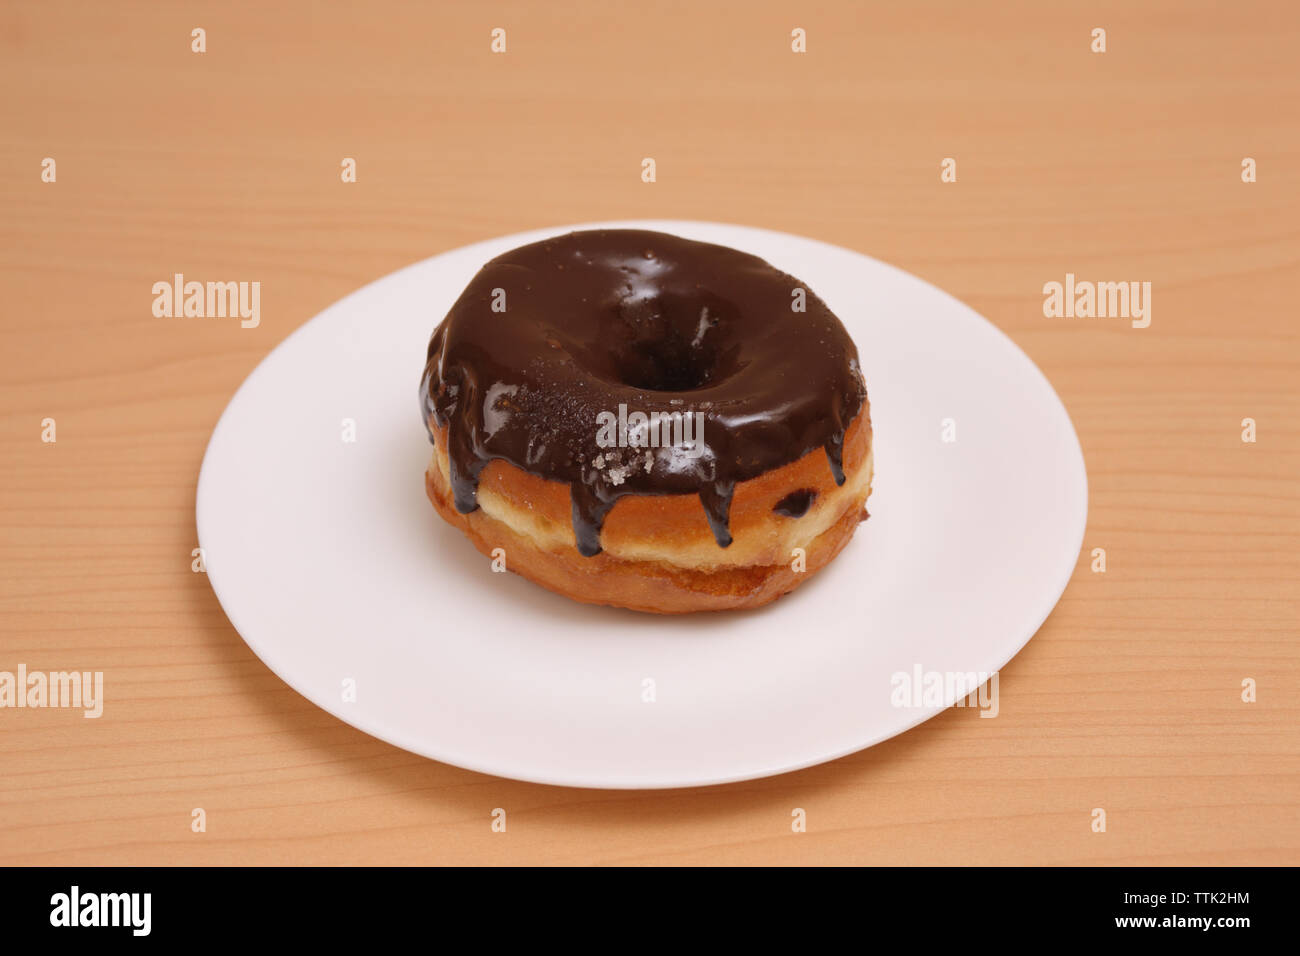 chocolate donut in a plate Stock Photo